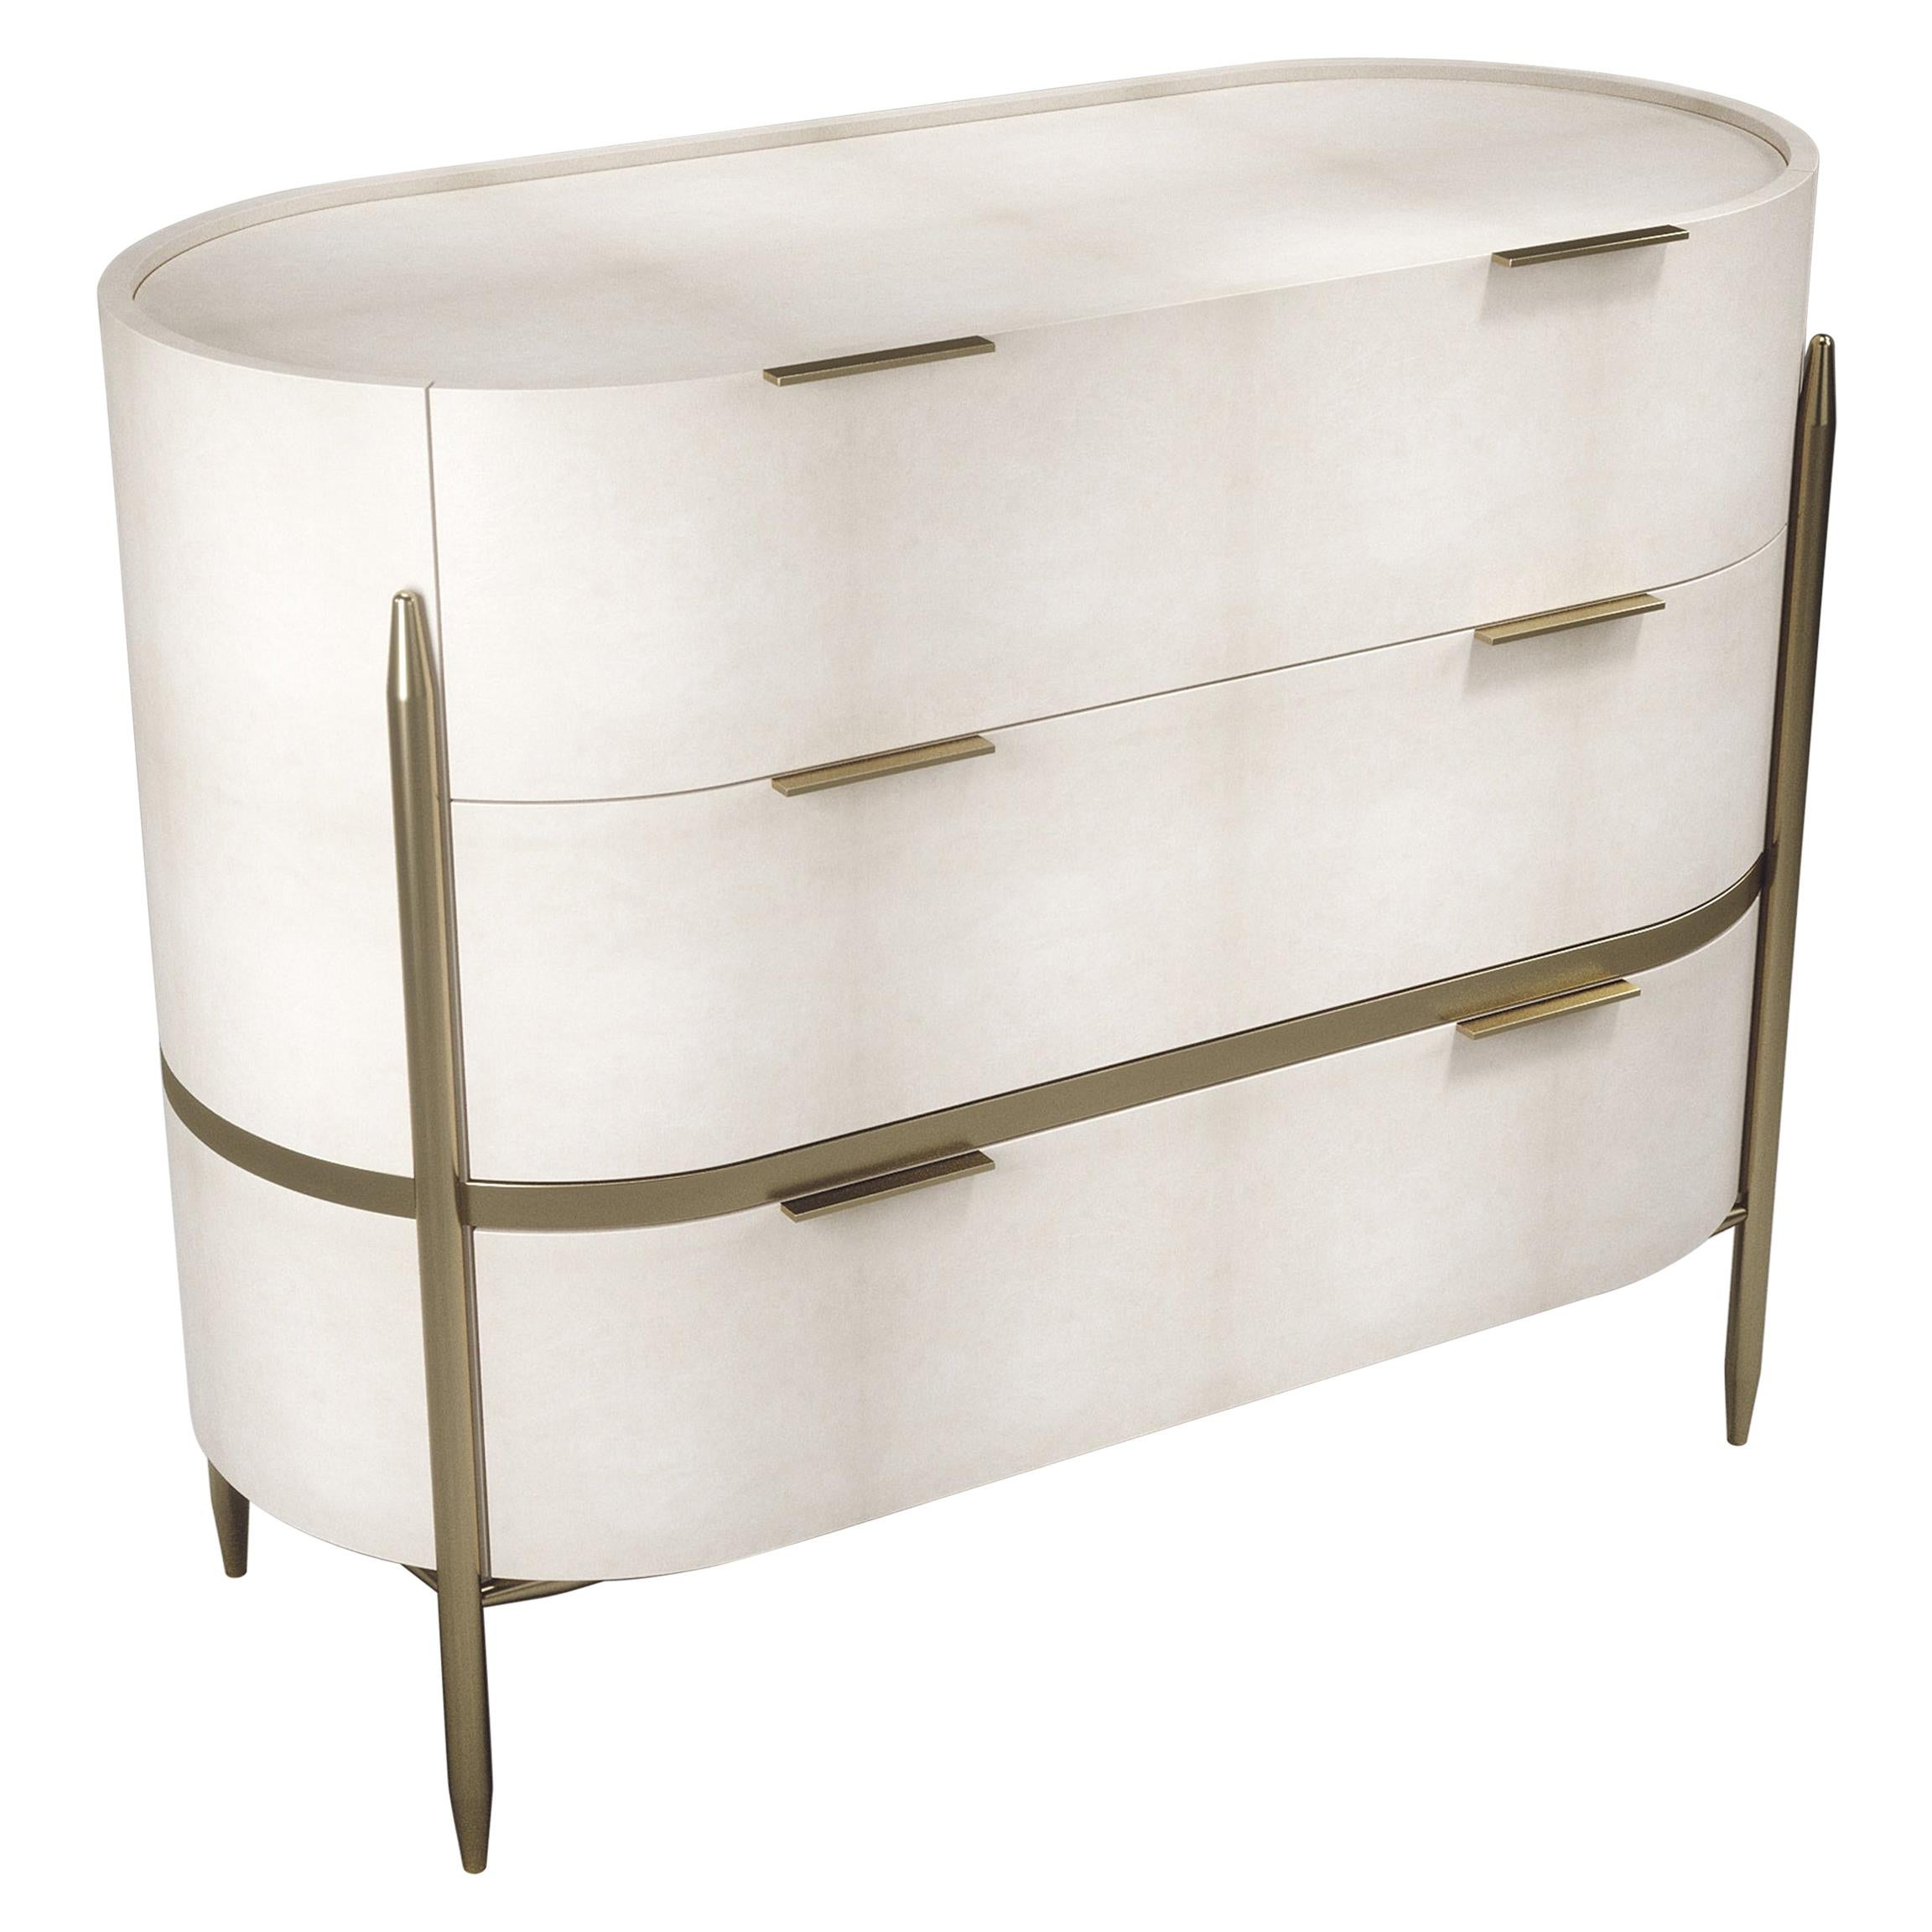 Parchment Chest of Drawers with Brass Accents by Kifu Paris